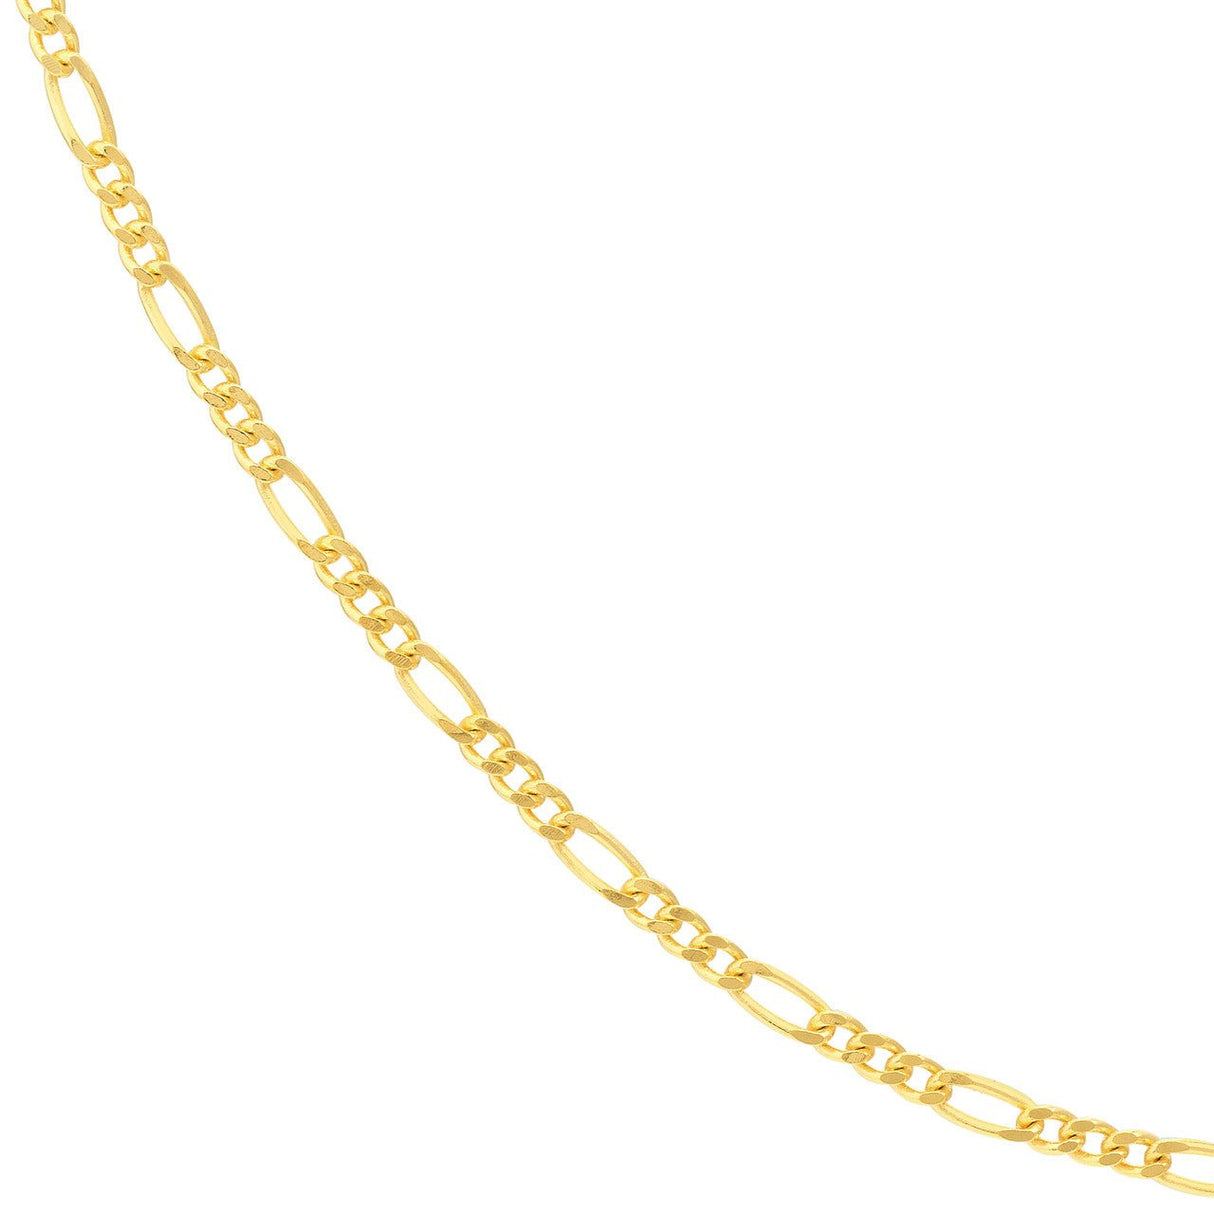 10K Gold Chain, 16", 1.30mm Figaro Chain with Spring Ring, Gold Layered Chain, Gold Necklaces, - Diamond Origin